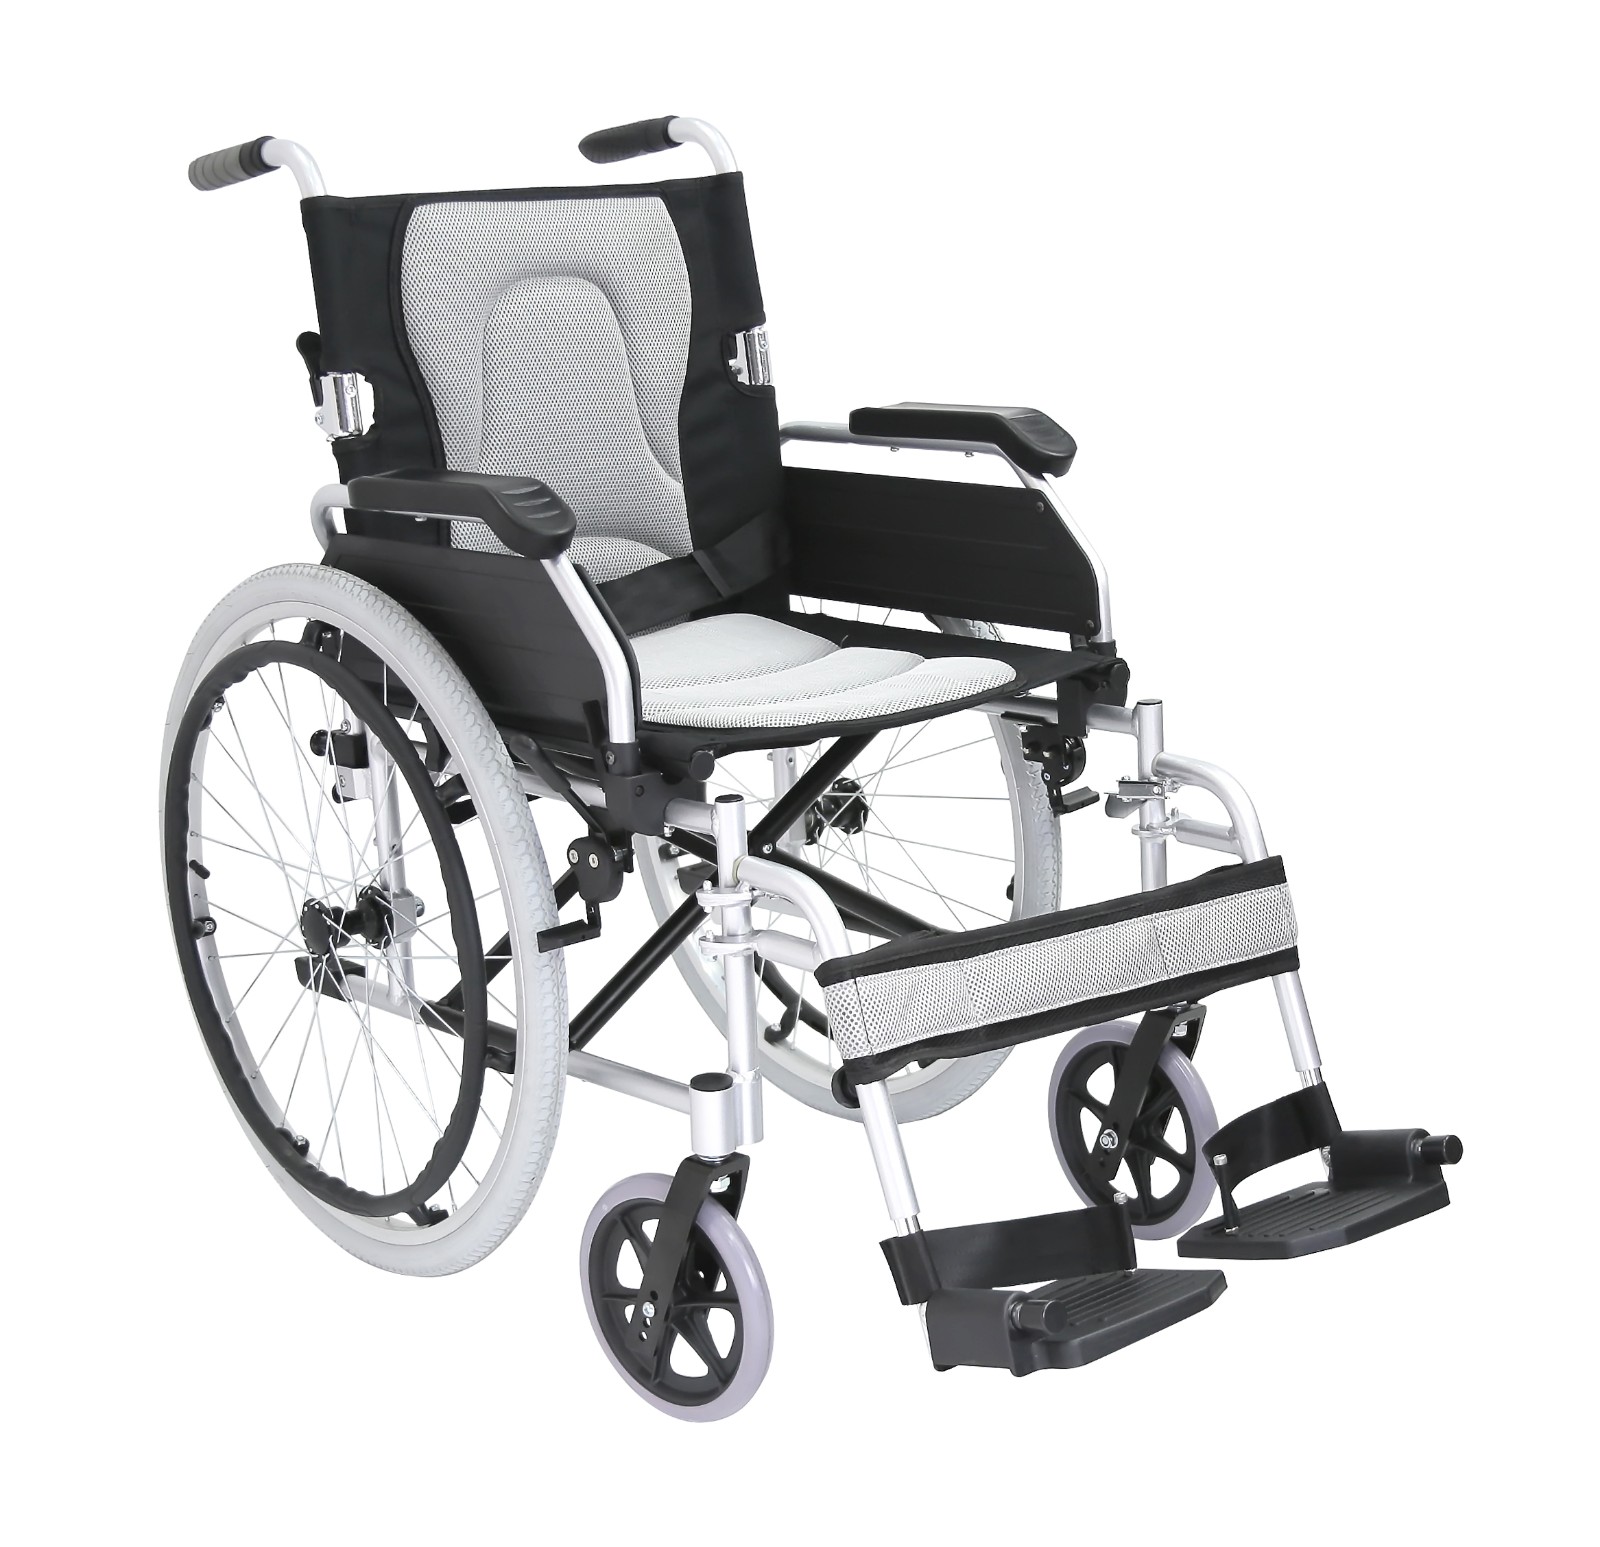 Light-weight Aluminum Functional Wheelchair with 22' solid rear wheel